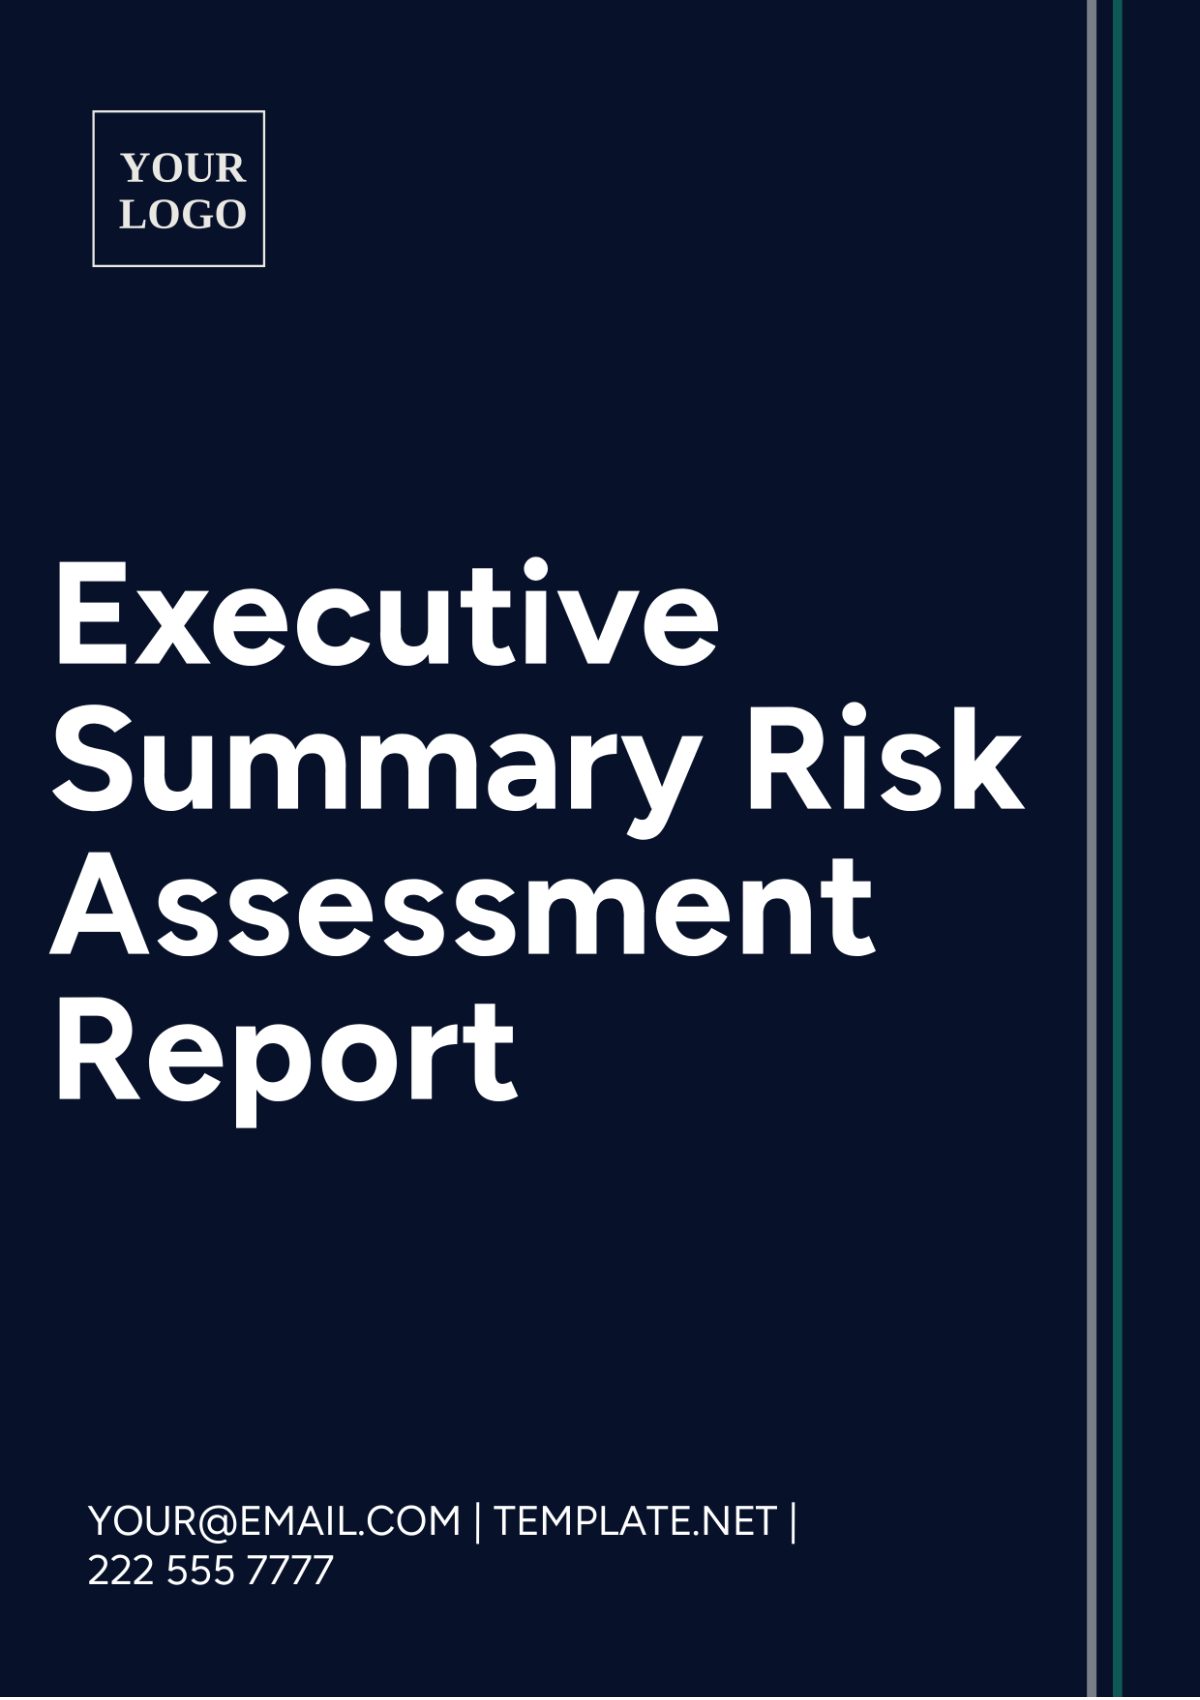 Executive Summary Risk Assessment Report Template